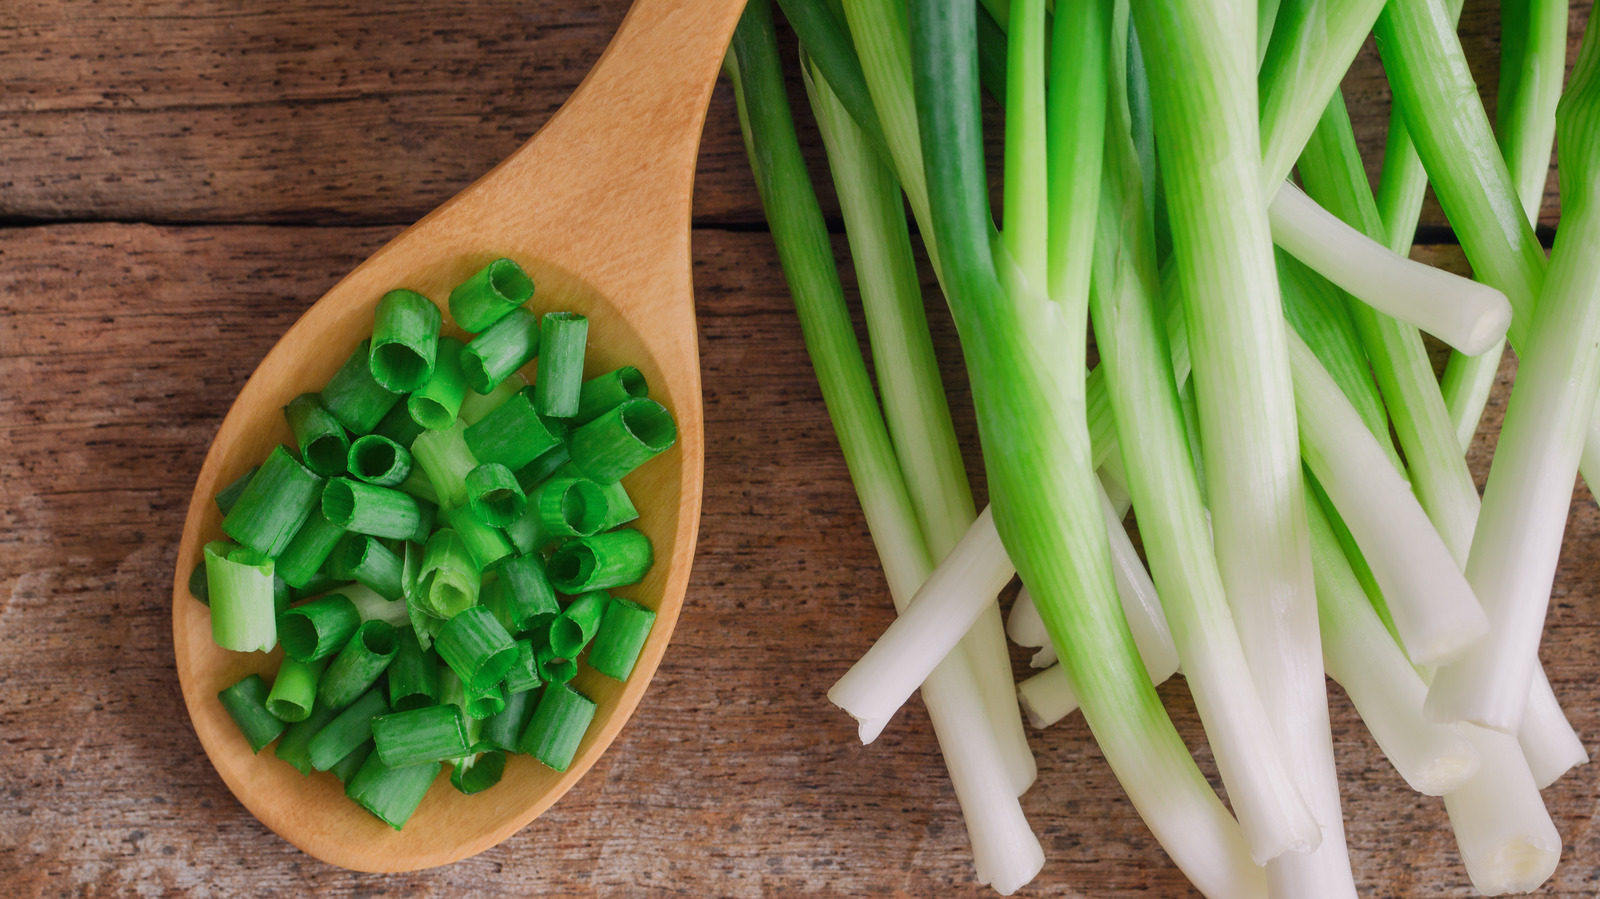 What Are Scallions And How Do You Use Them?